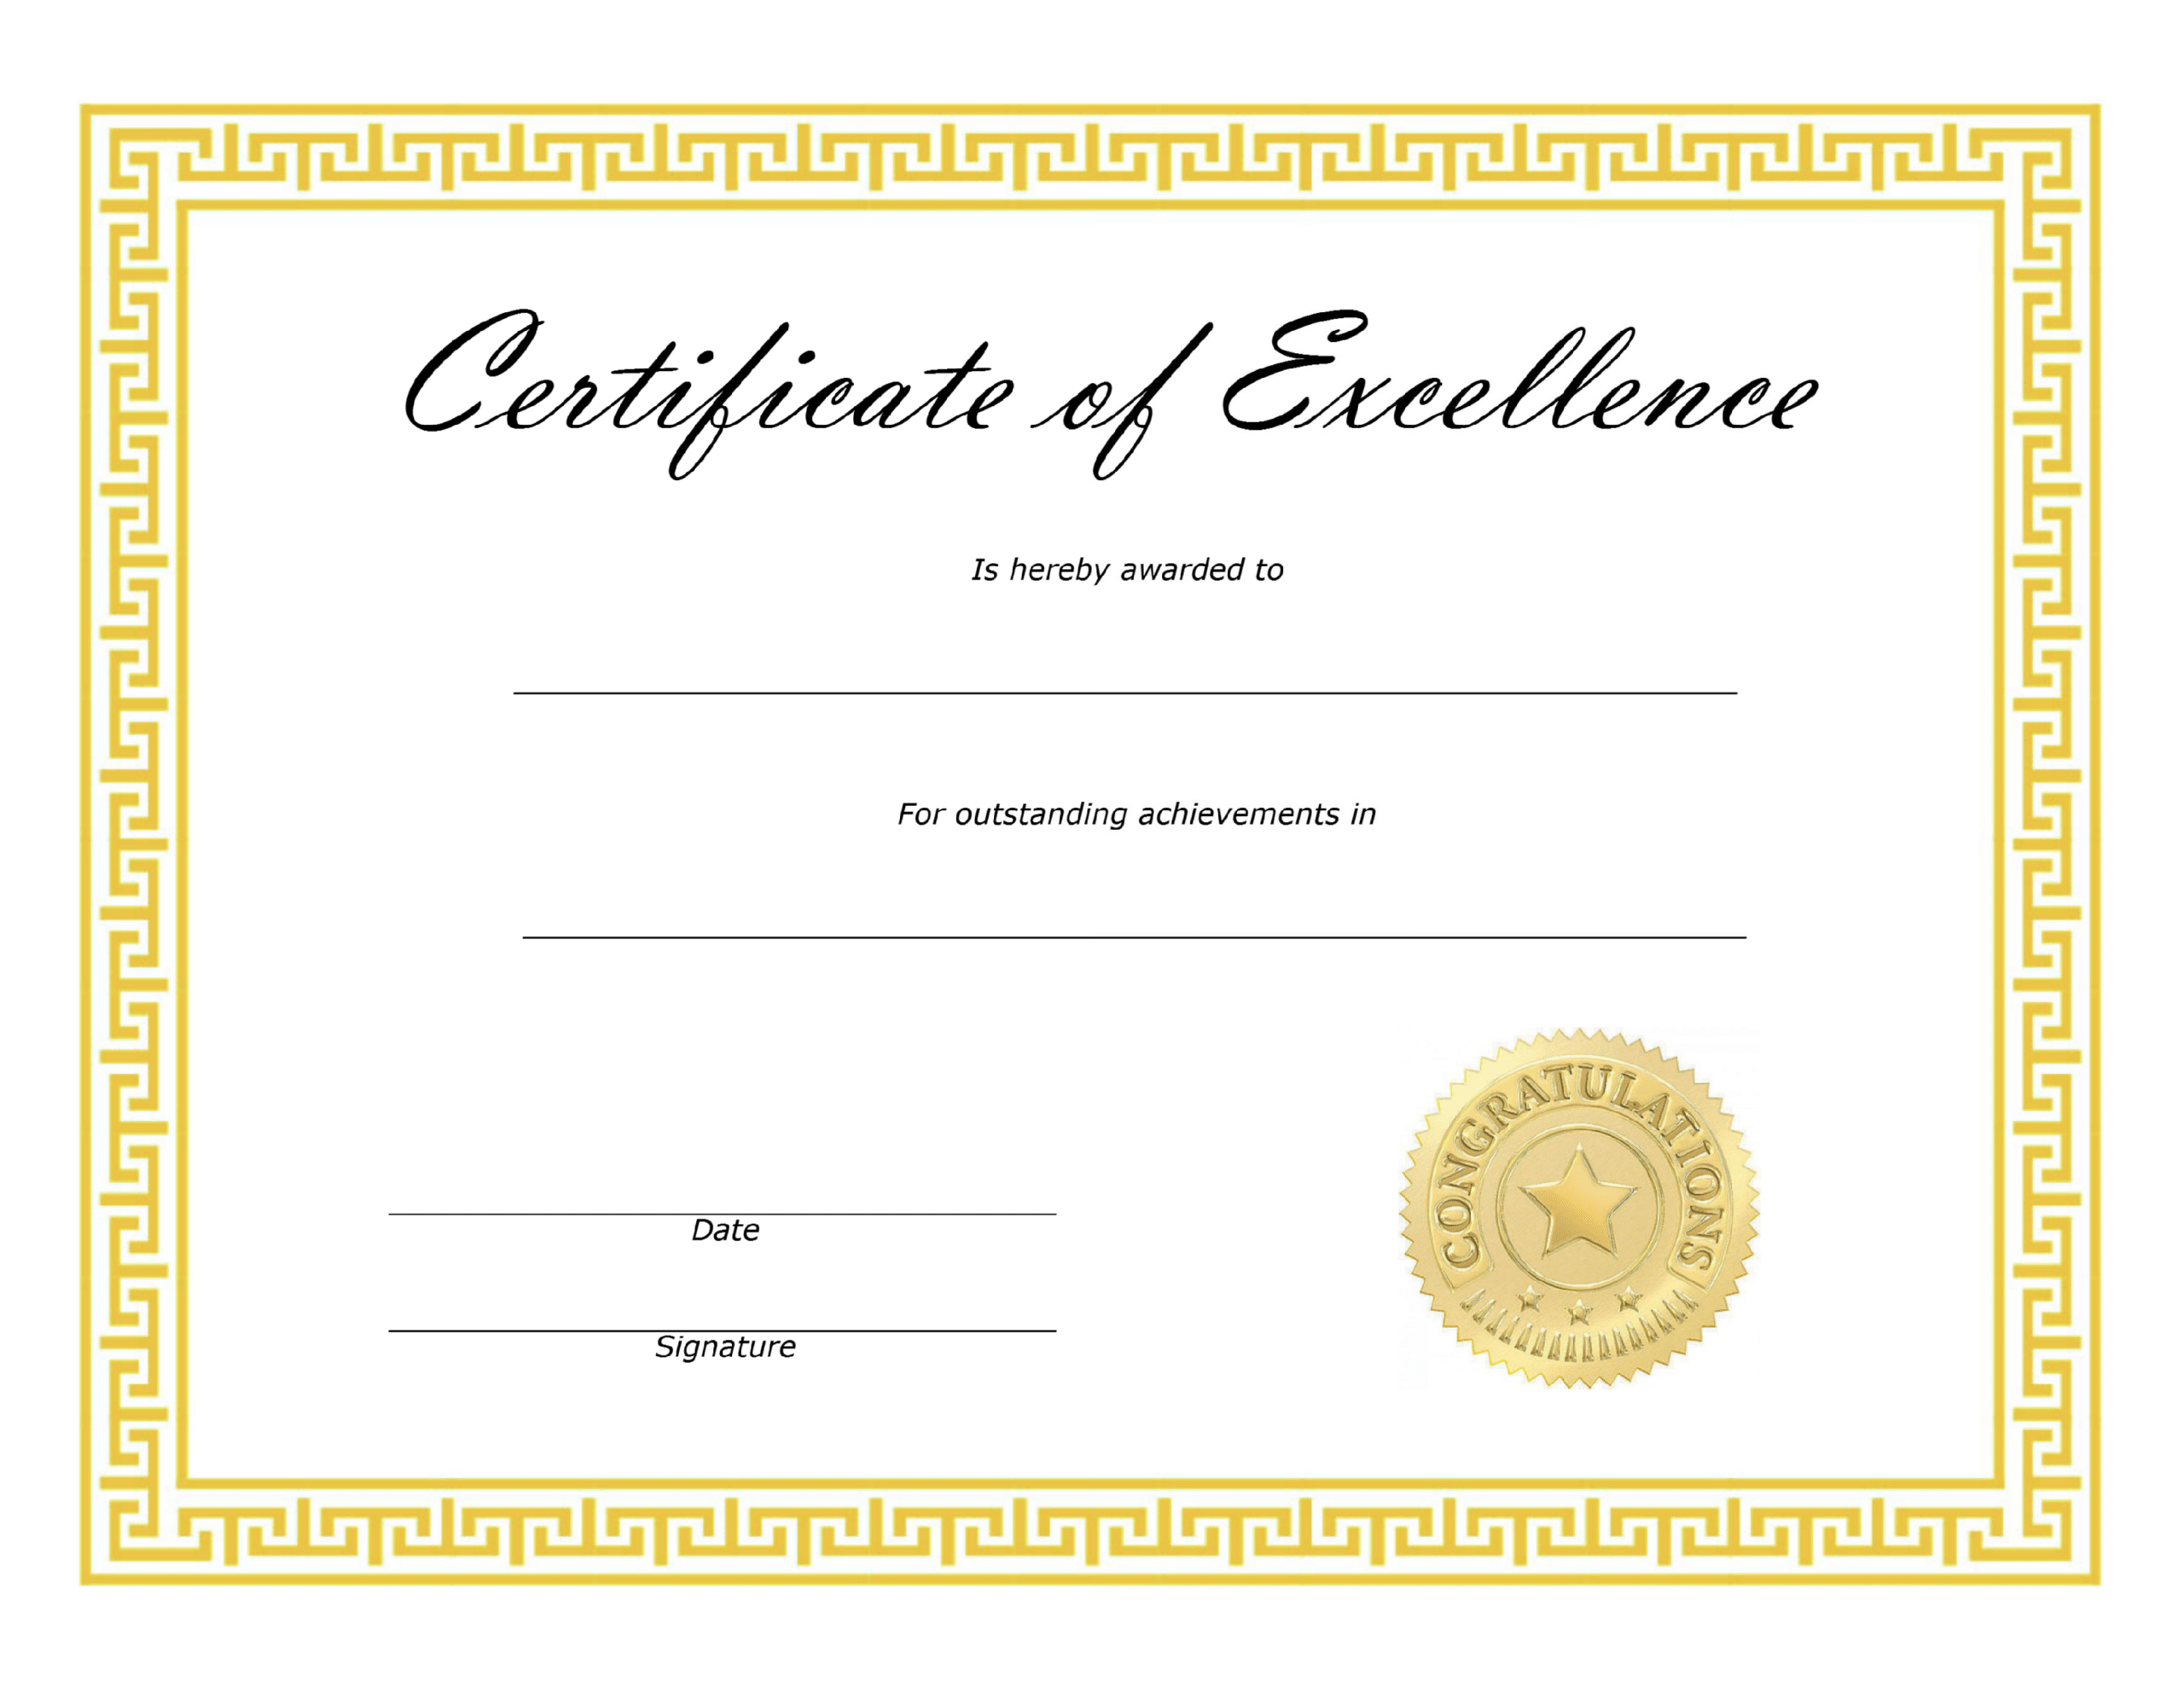 ❤️ Free Sample Certificate Of Excellence Templates❤️ Intended For Certificate Of Excellence Template Free Download